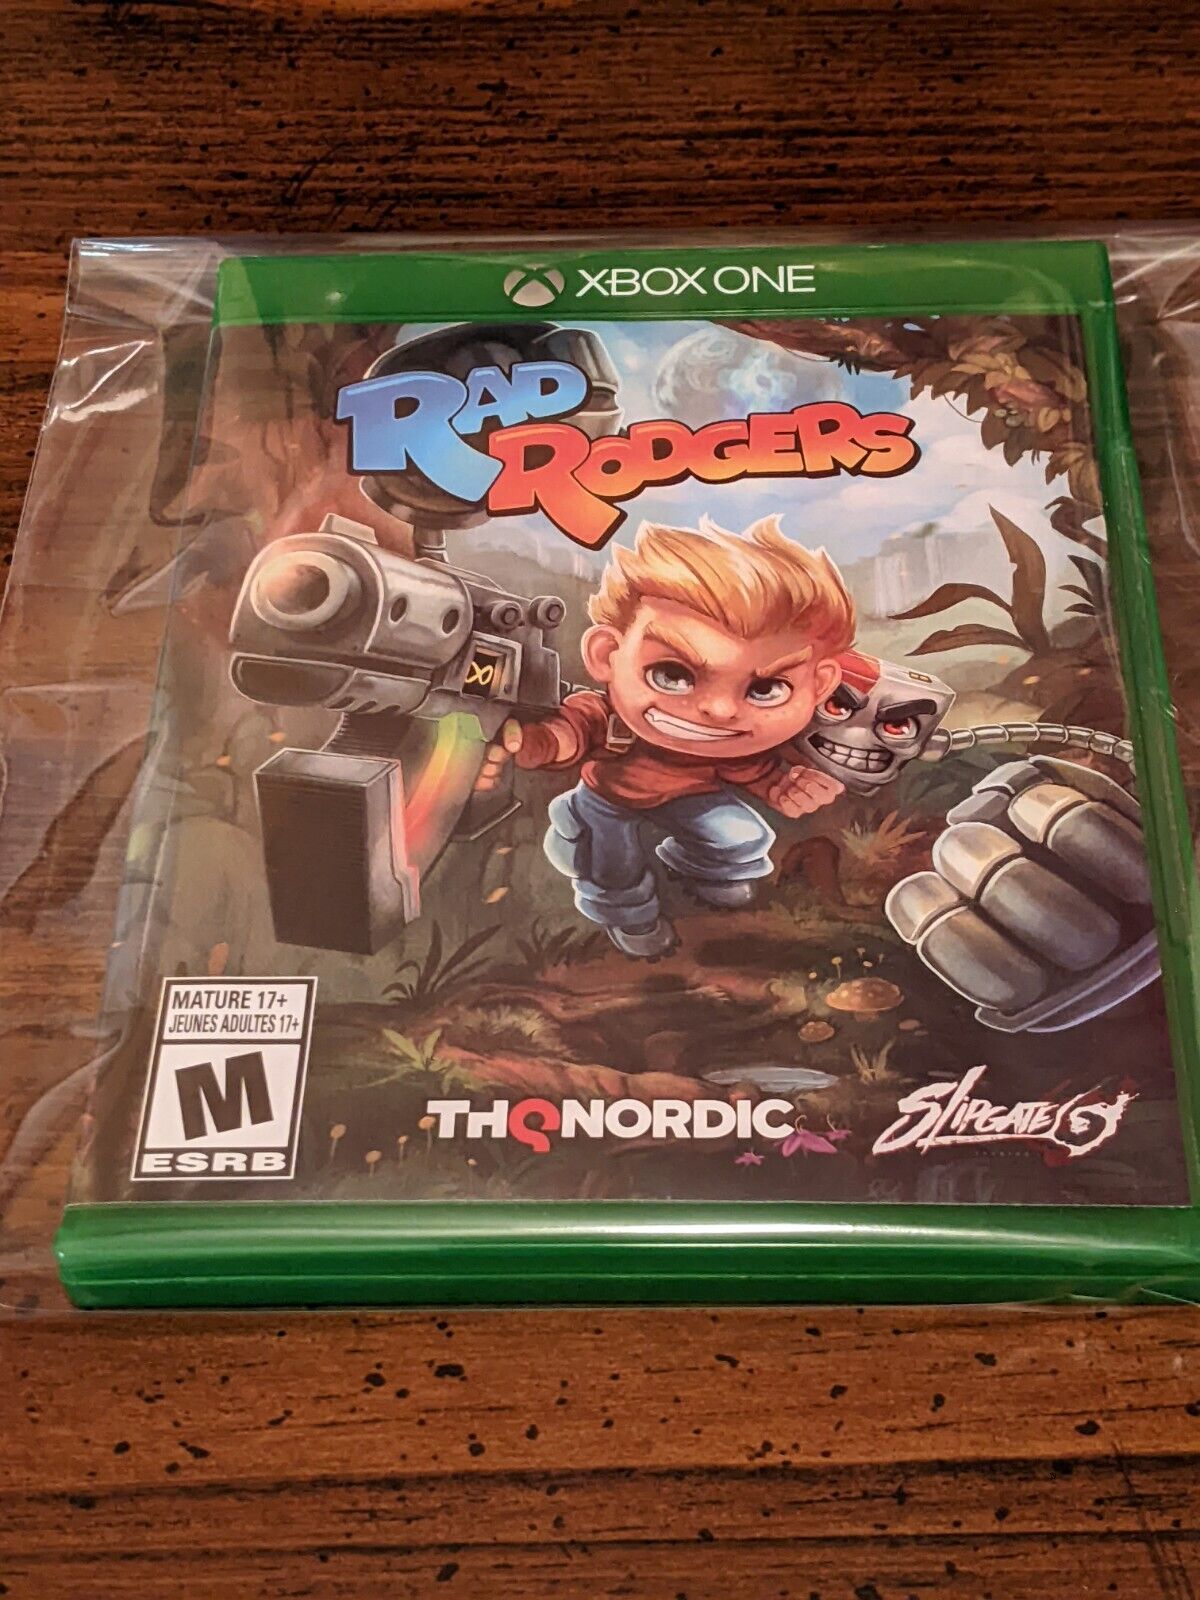 Rad Rodgers (XBOX ONE) unsealed but new pics . One owner 